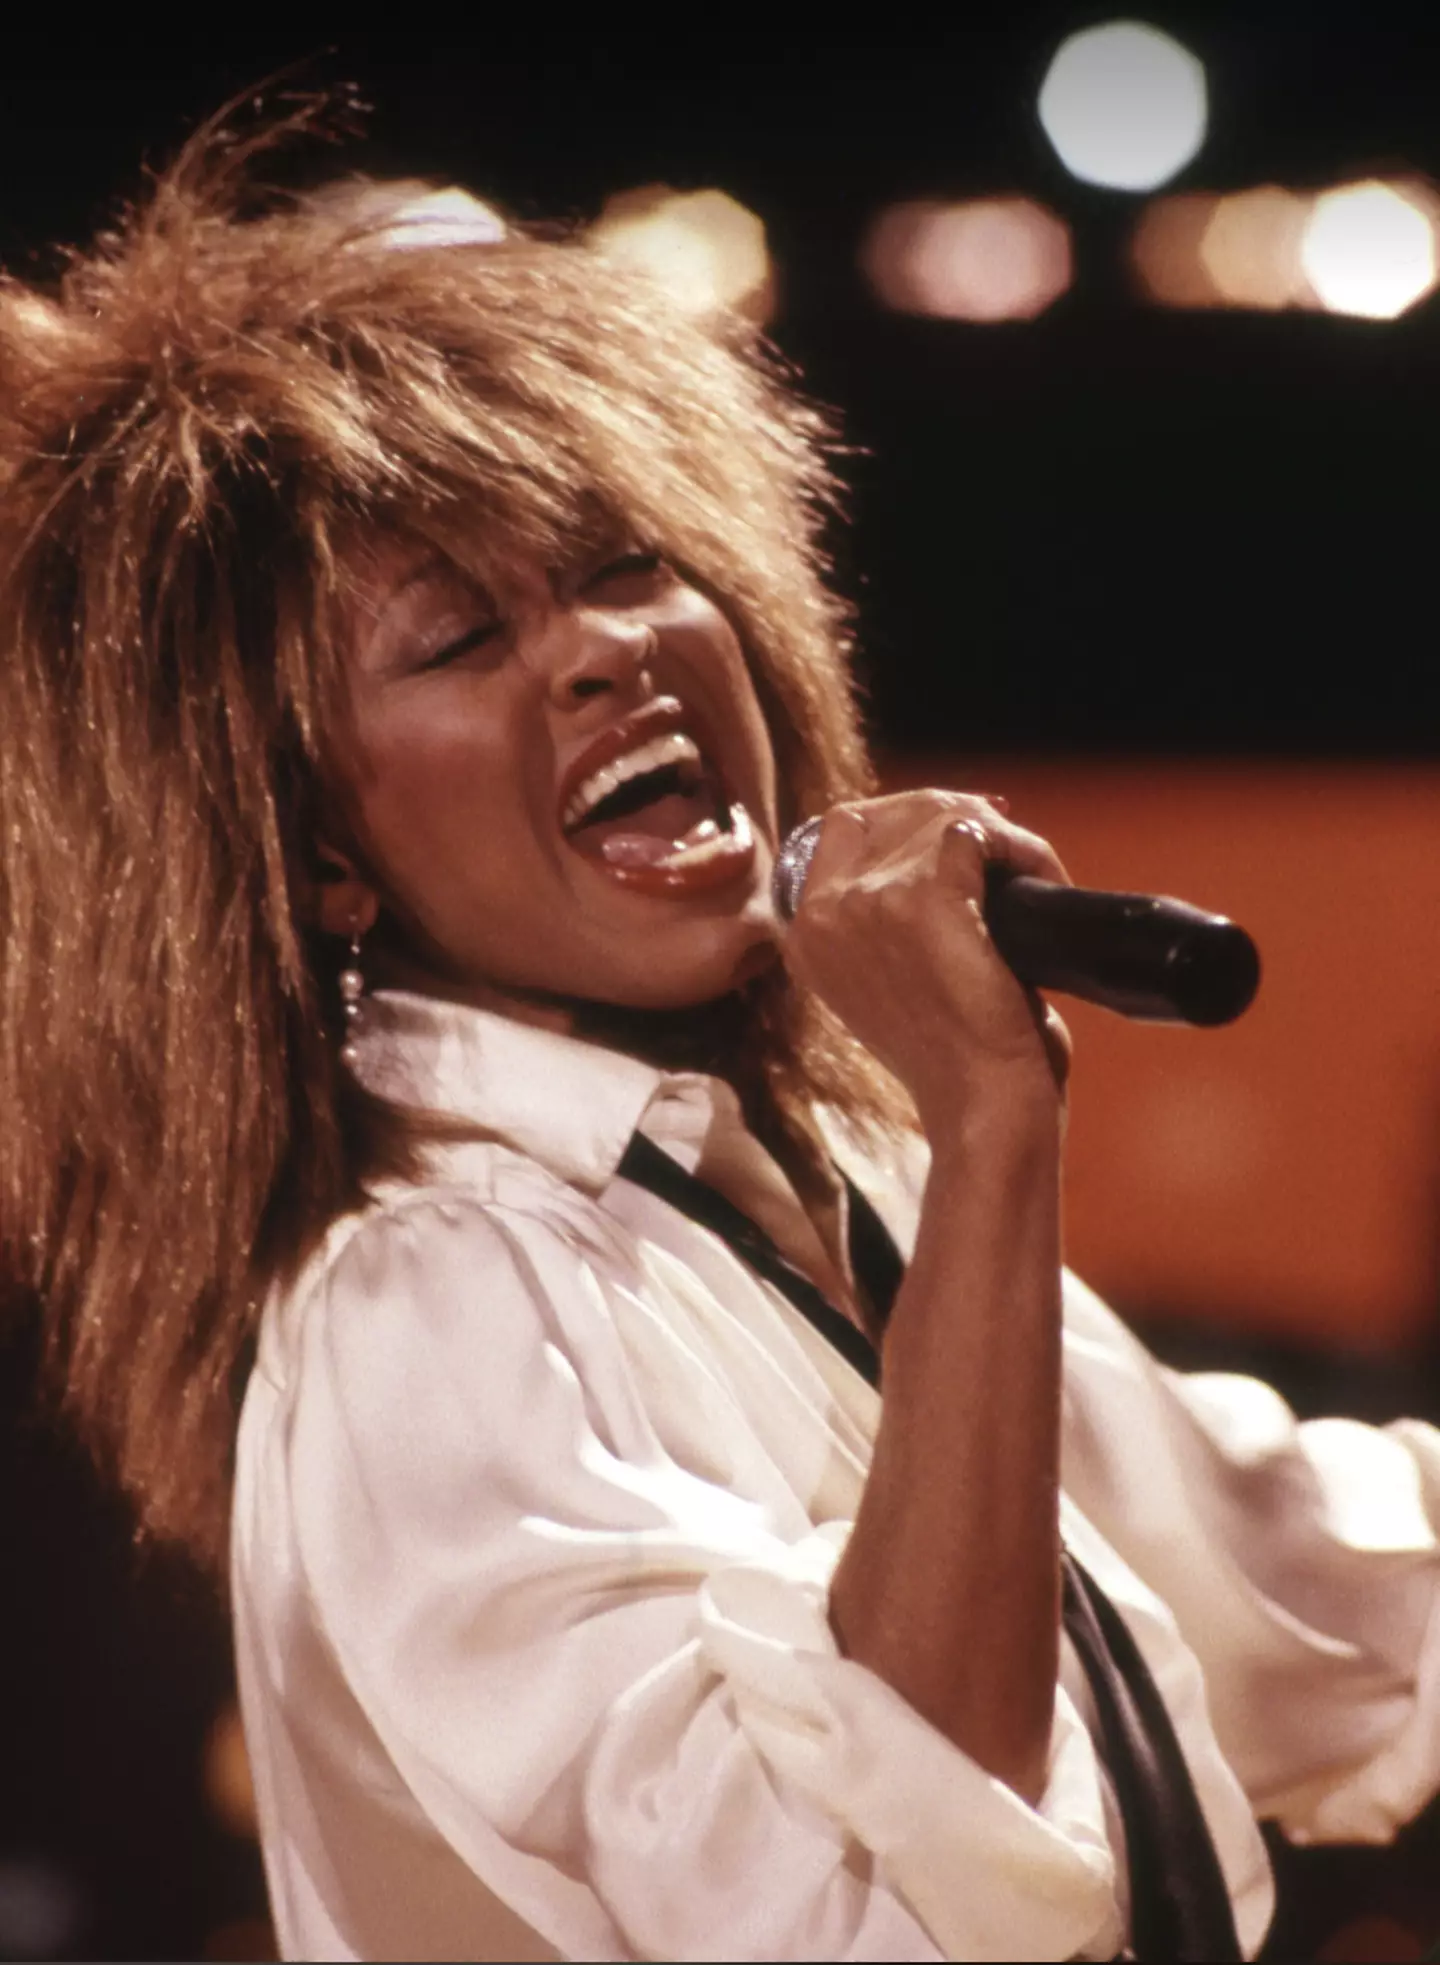 Tina Turner has died at the age of 83.